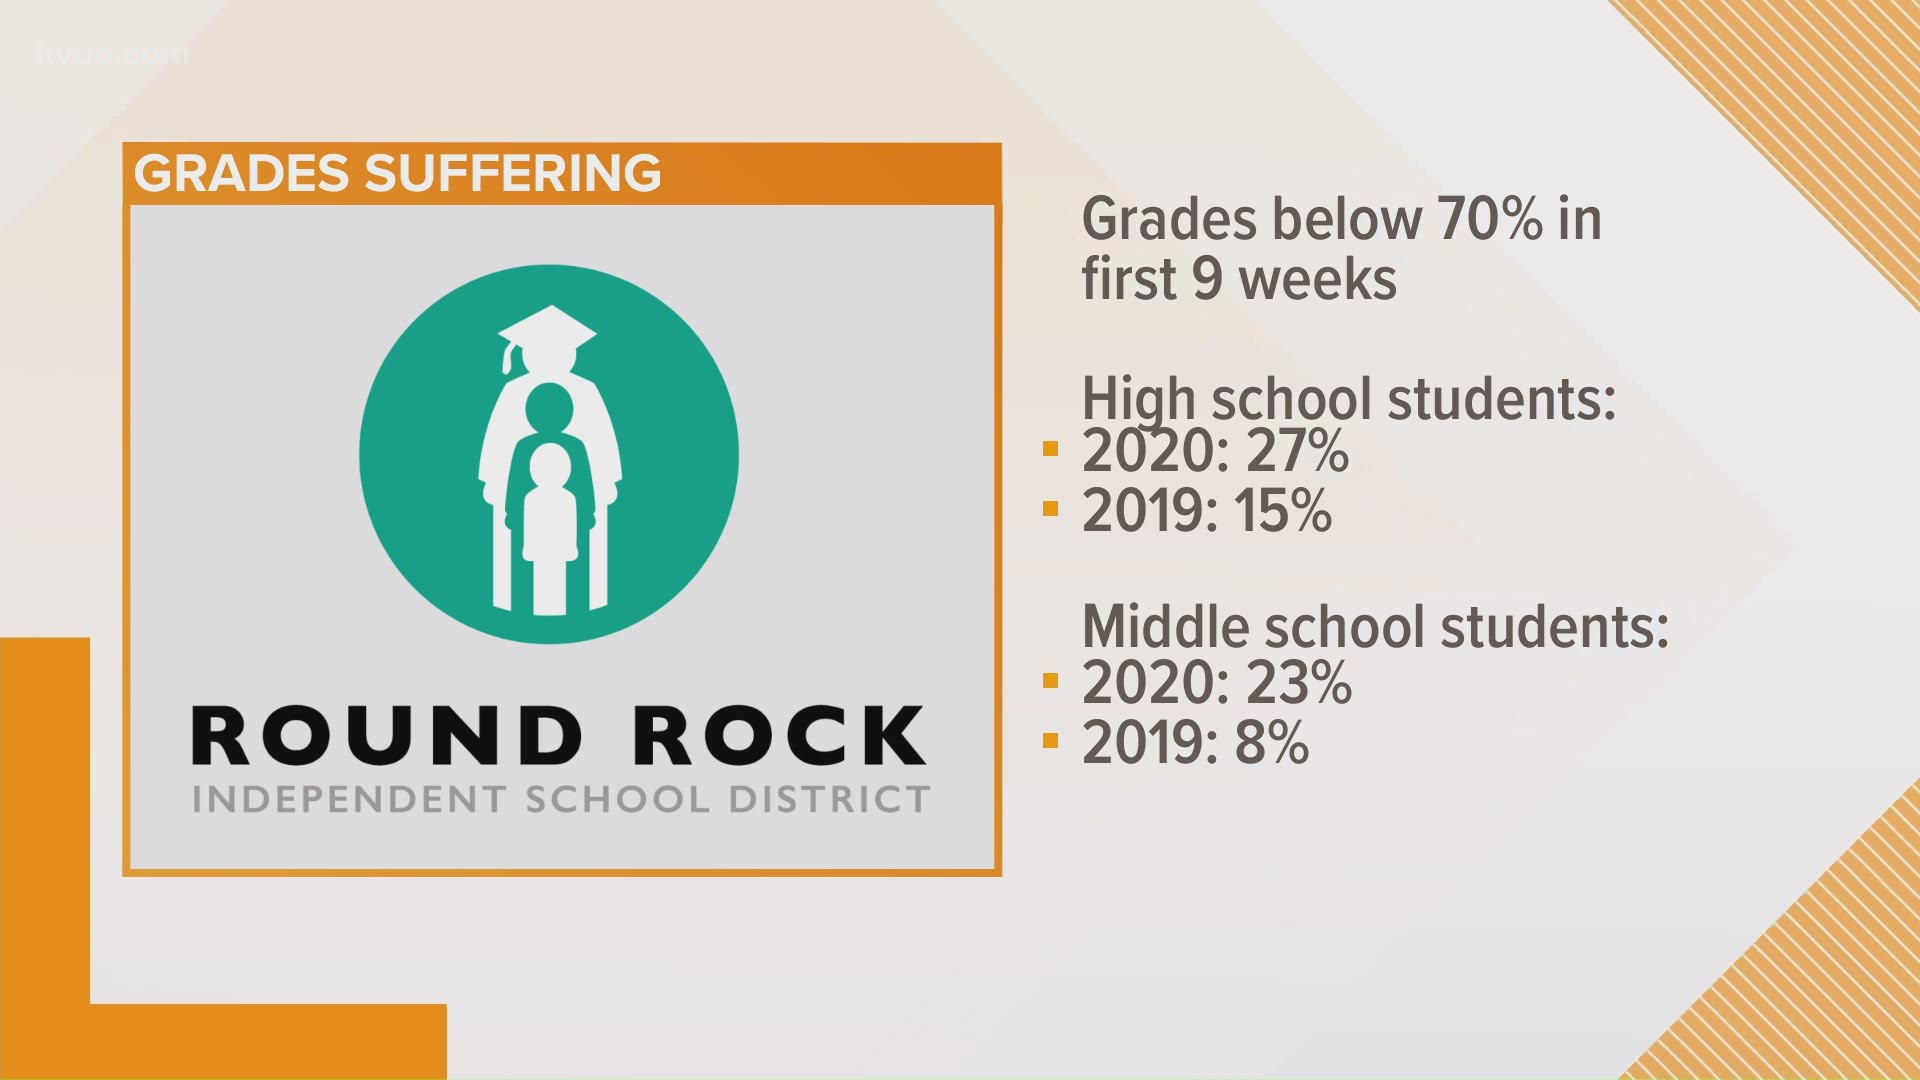 Many students have been learning virtually since March and leaders at Round Rock ISD say grades are suffering.